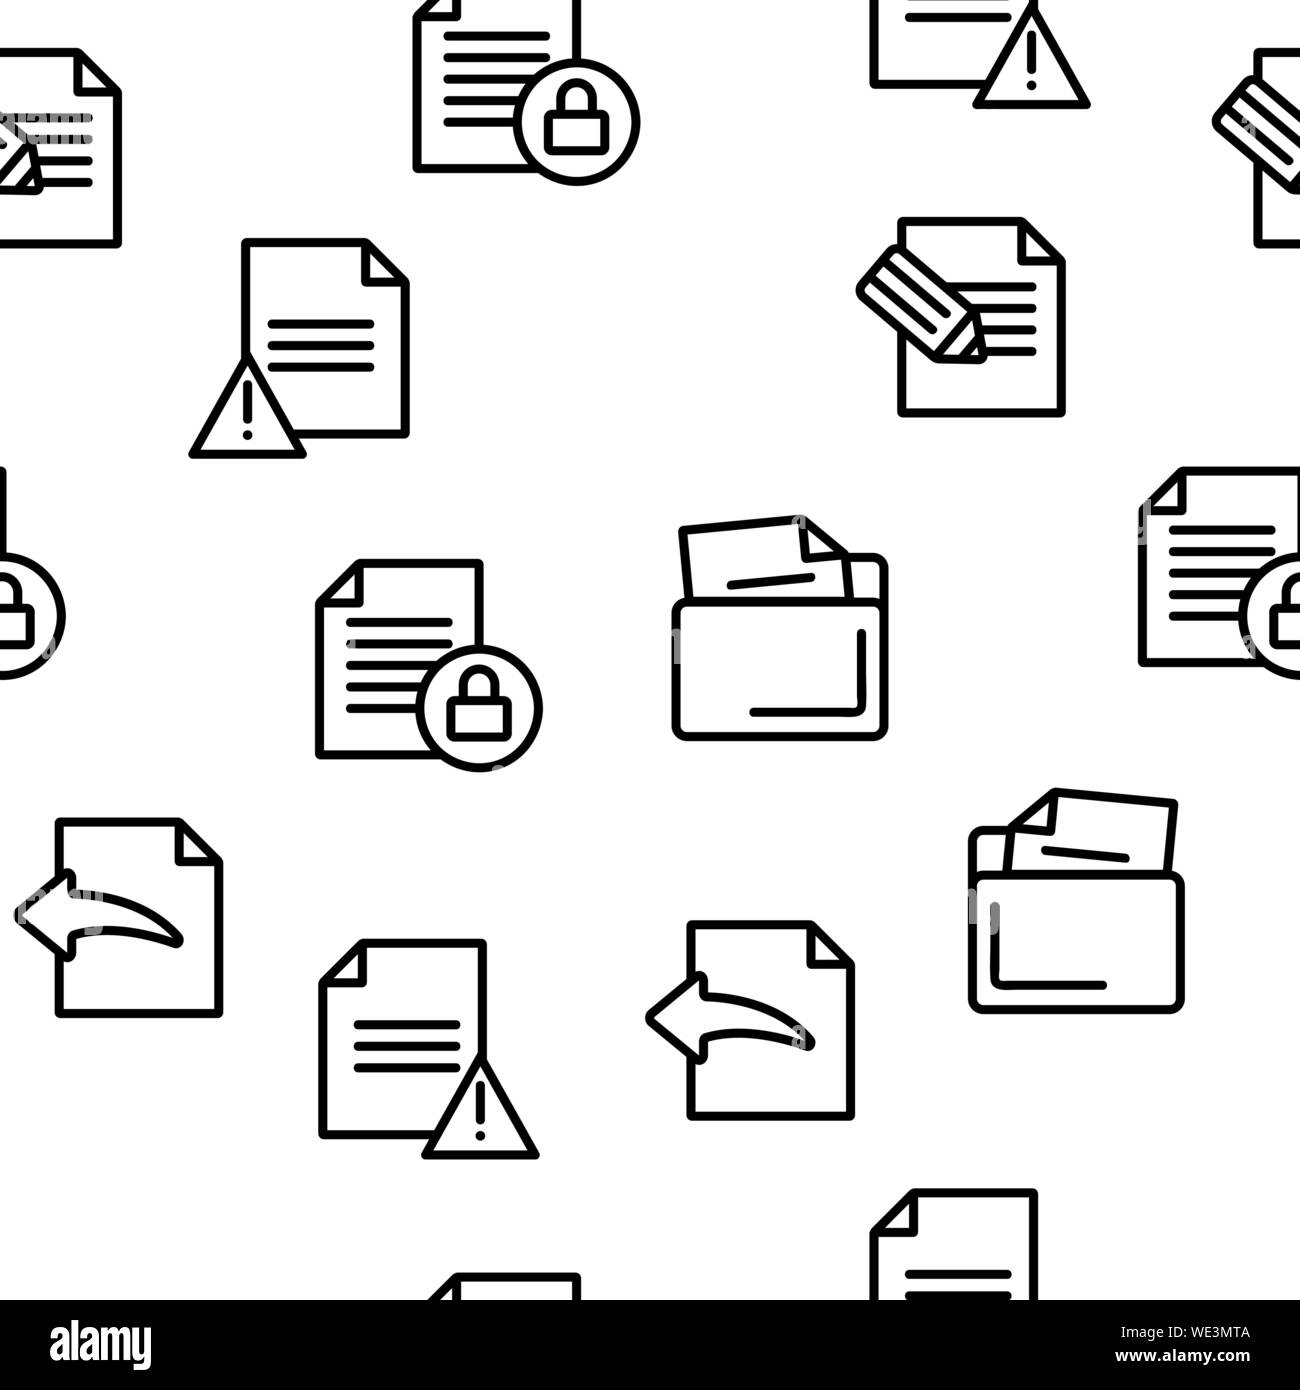 Digital, Computer Documents, File Vector Seamless Pattern Stock Vector